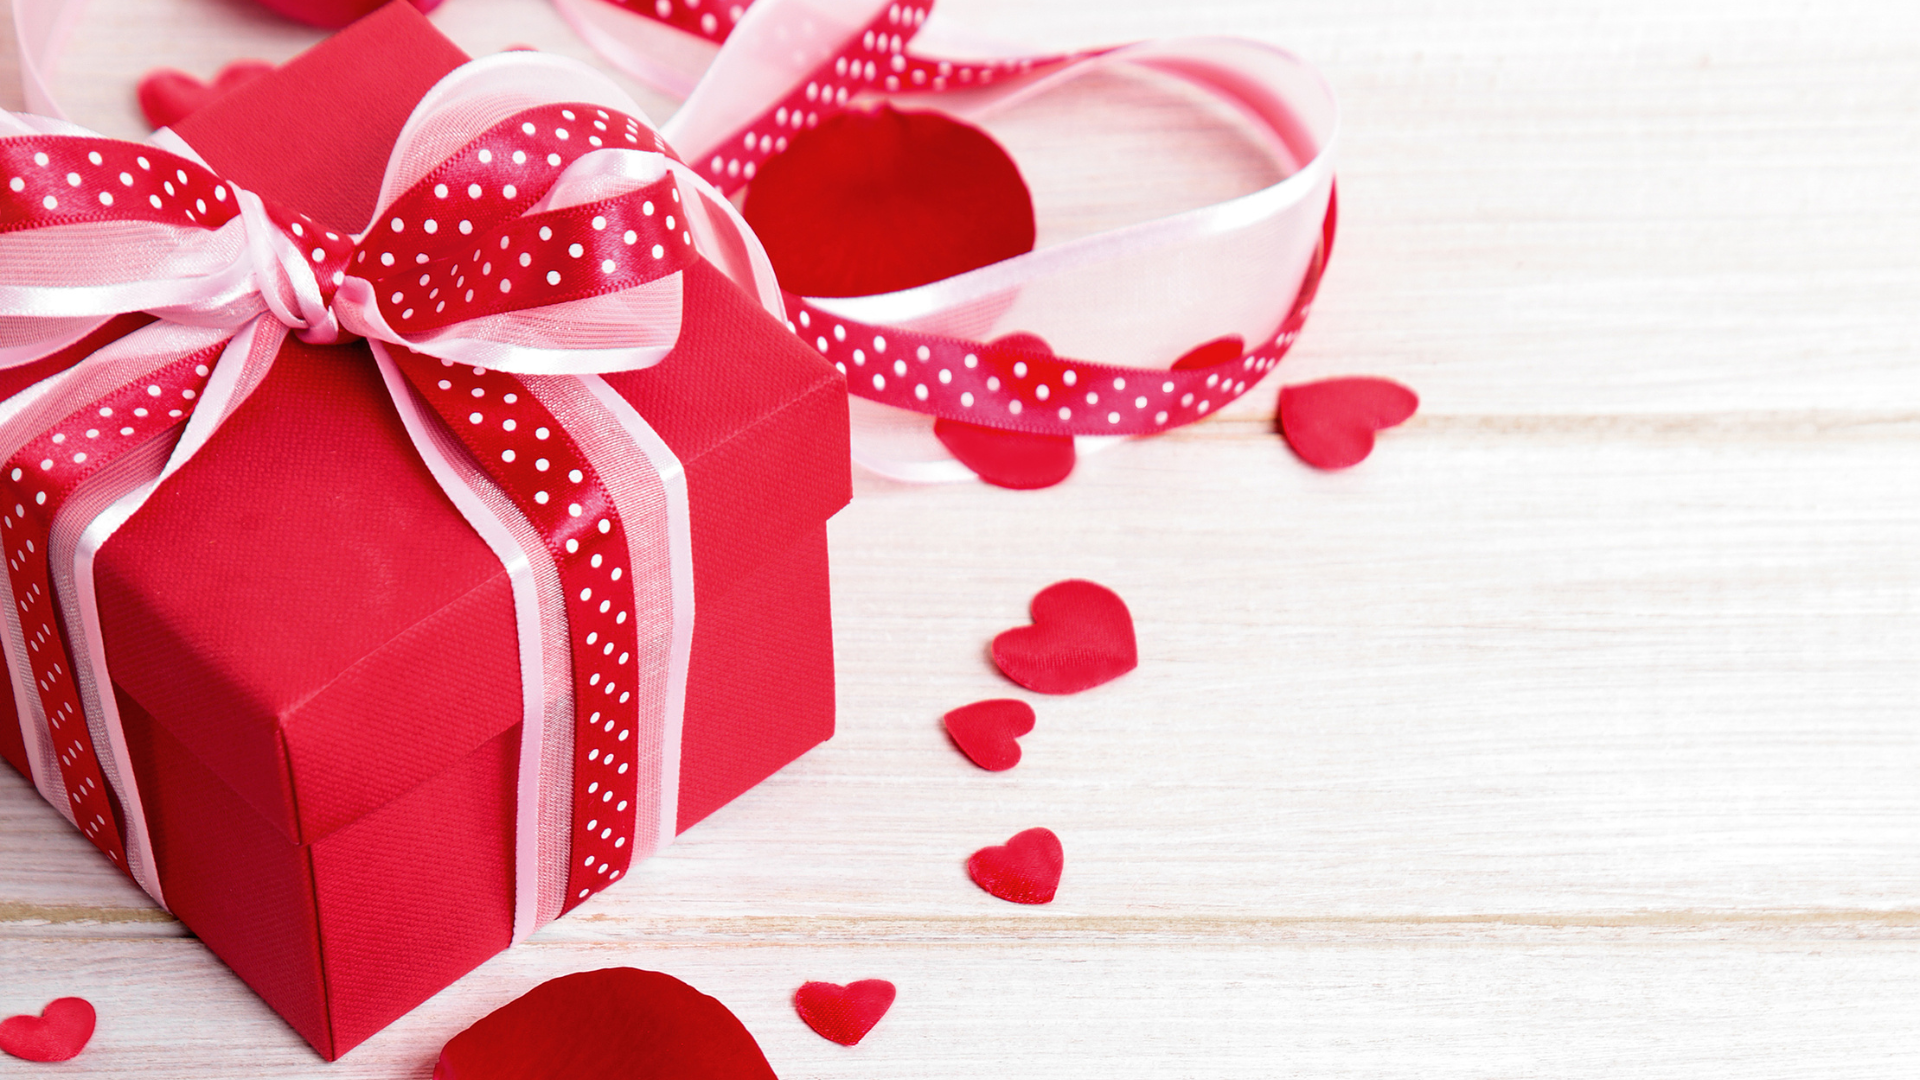 Valentines Gift Guide for Him